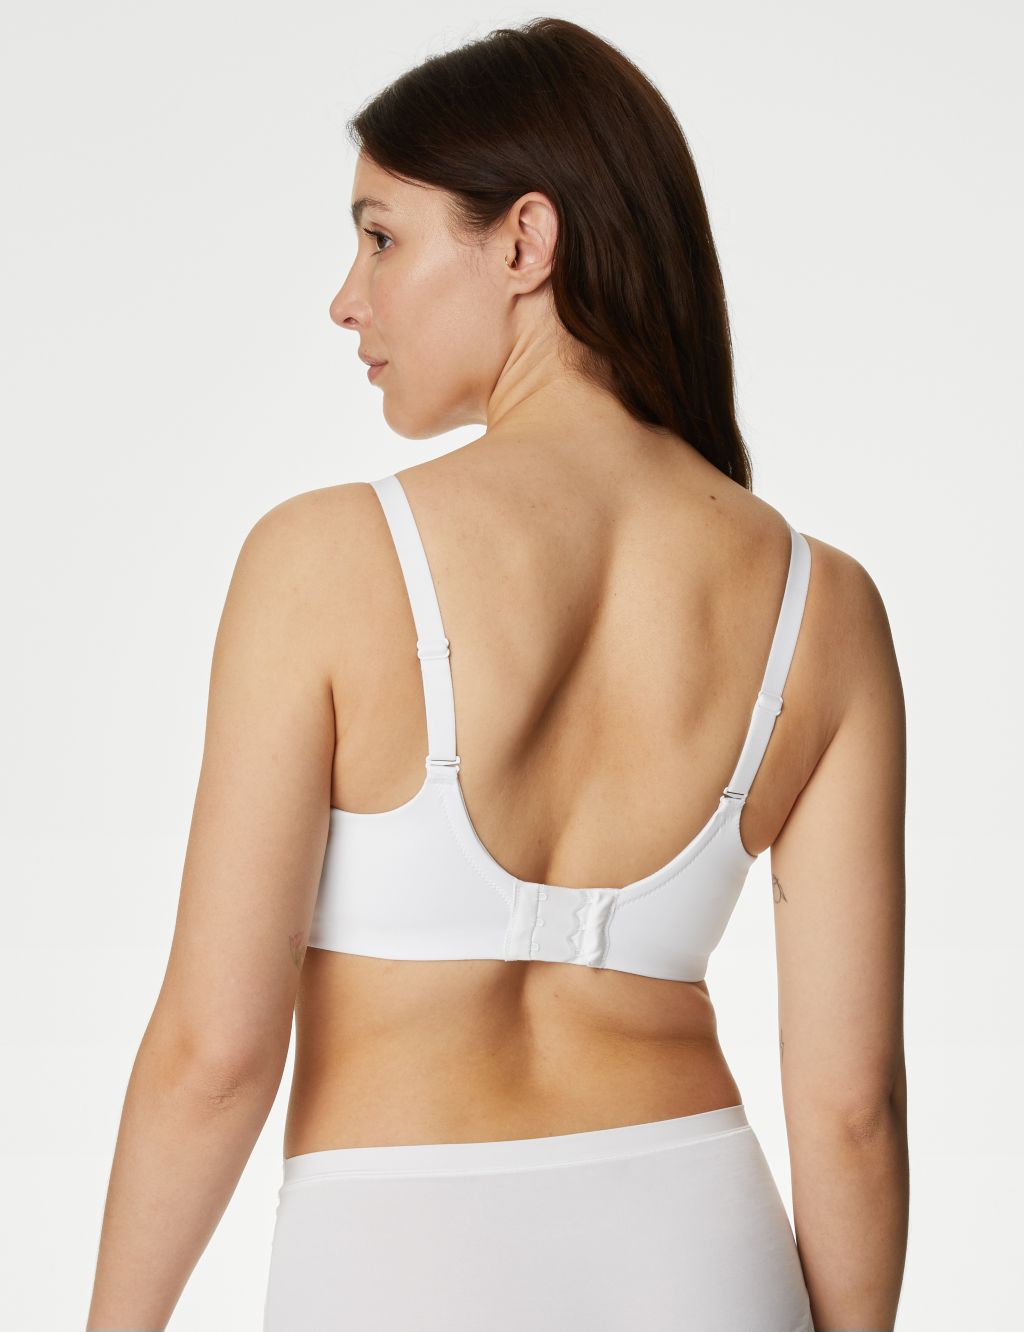 Flexifit™ Non-Wired Full Cup Bra F-H image 4